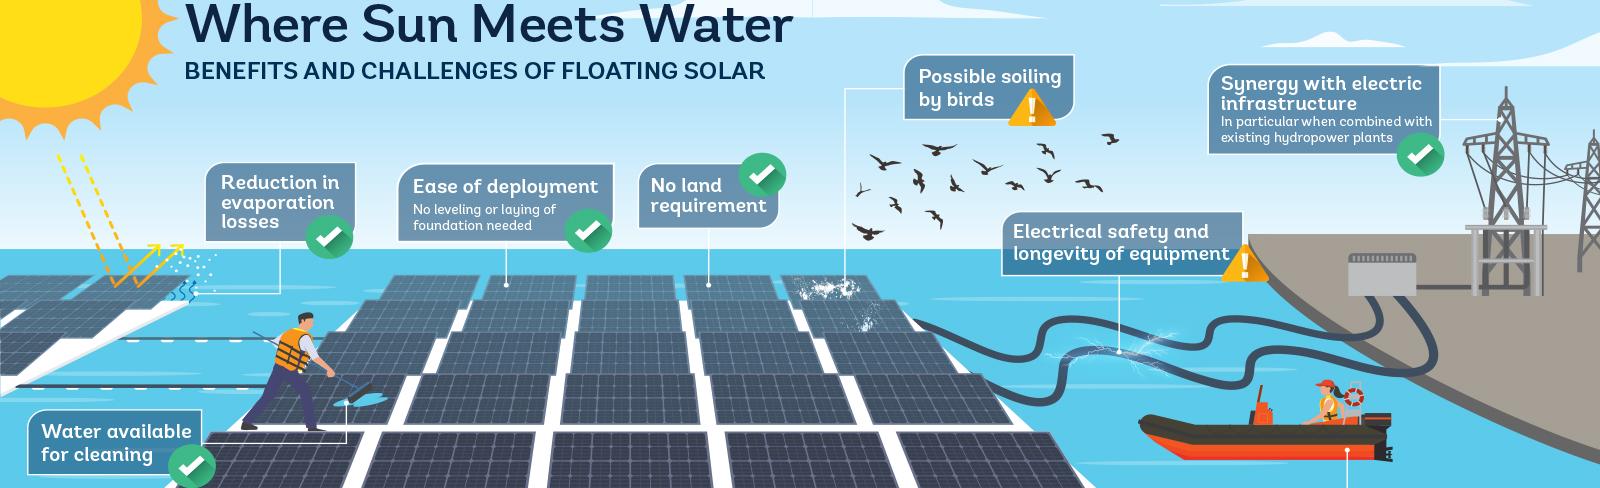 Where Sun Meets Water: Floating Solar Market Report